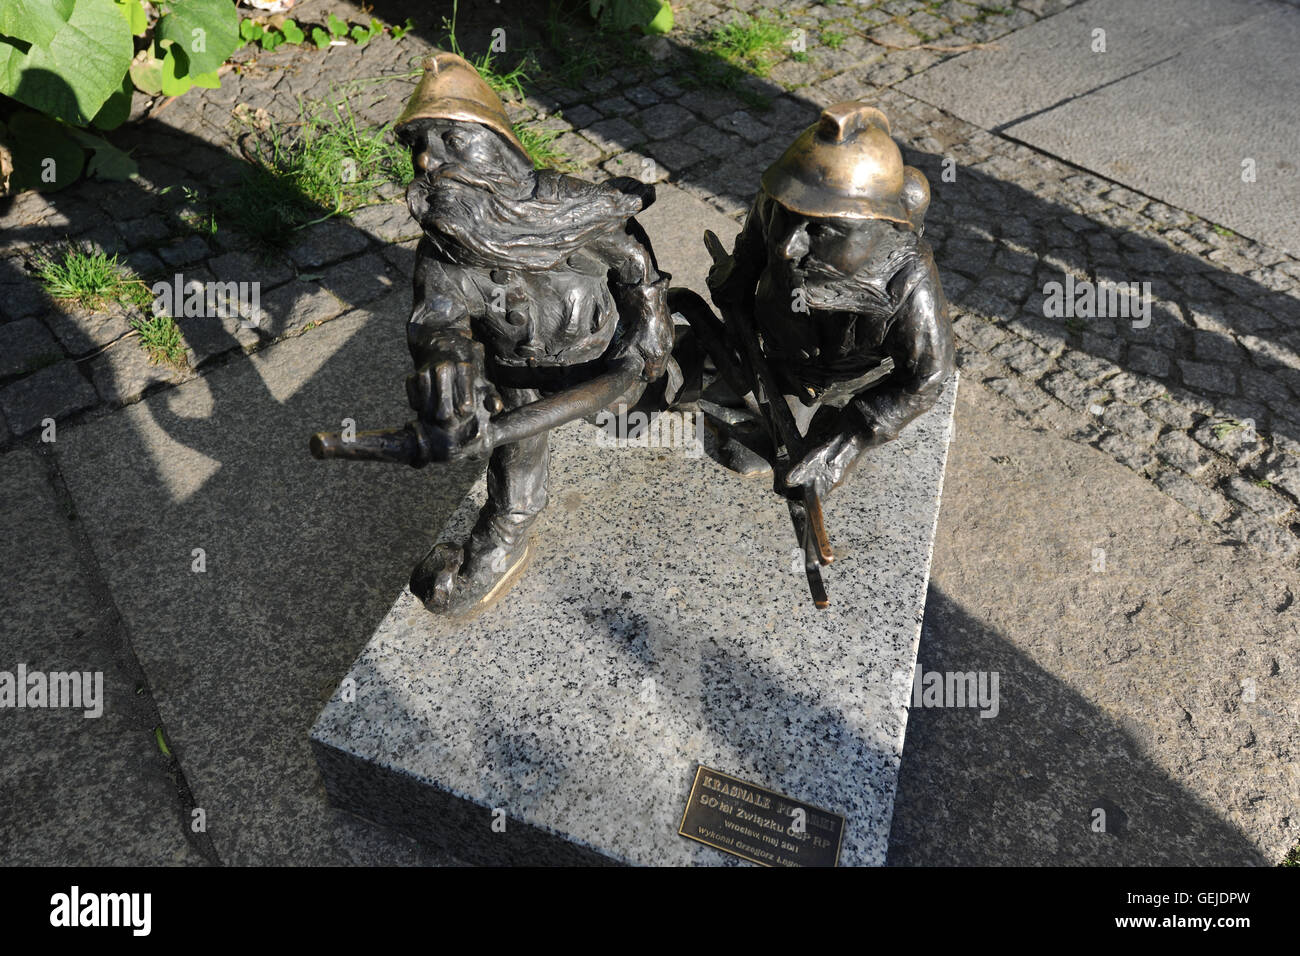 One of Wrocław’s most popular and iconic attractions - a dwarf duo - unlikely symbol of one of Poland's most picturesque cities. Stock Photo